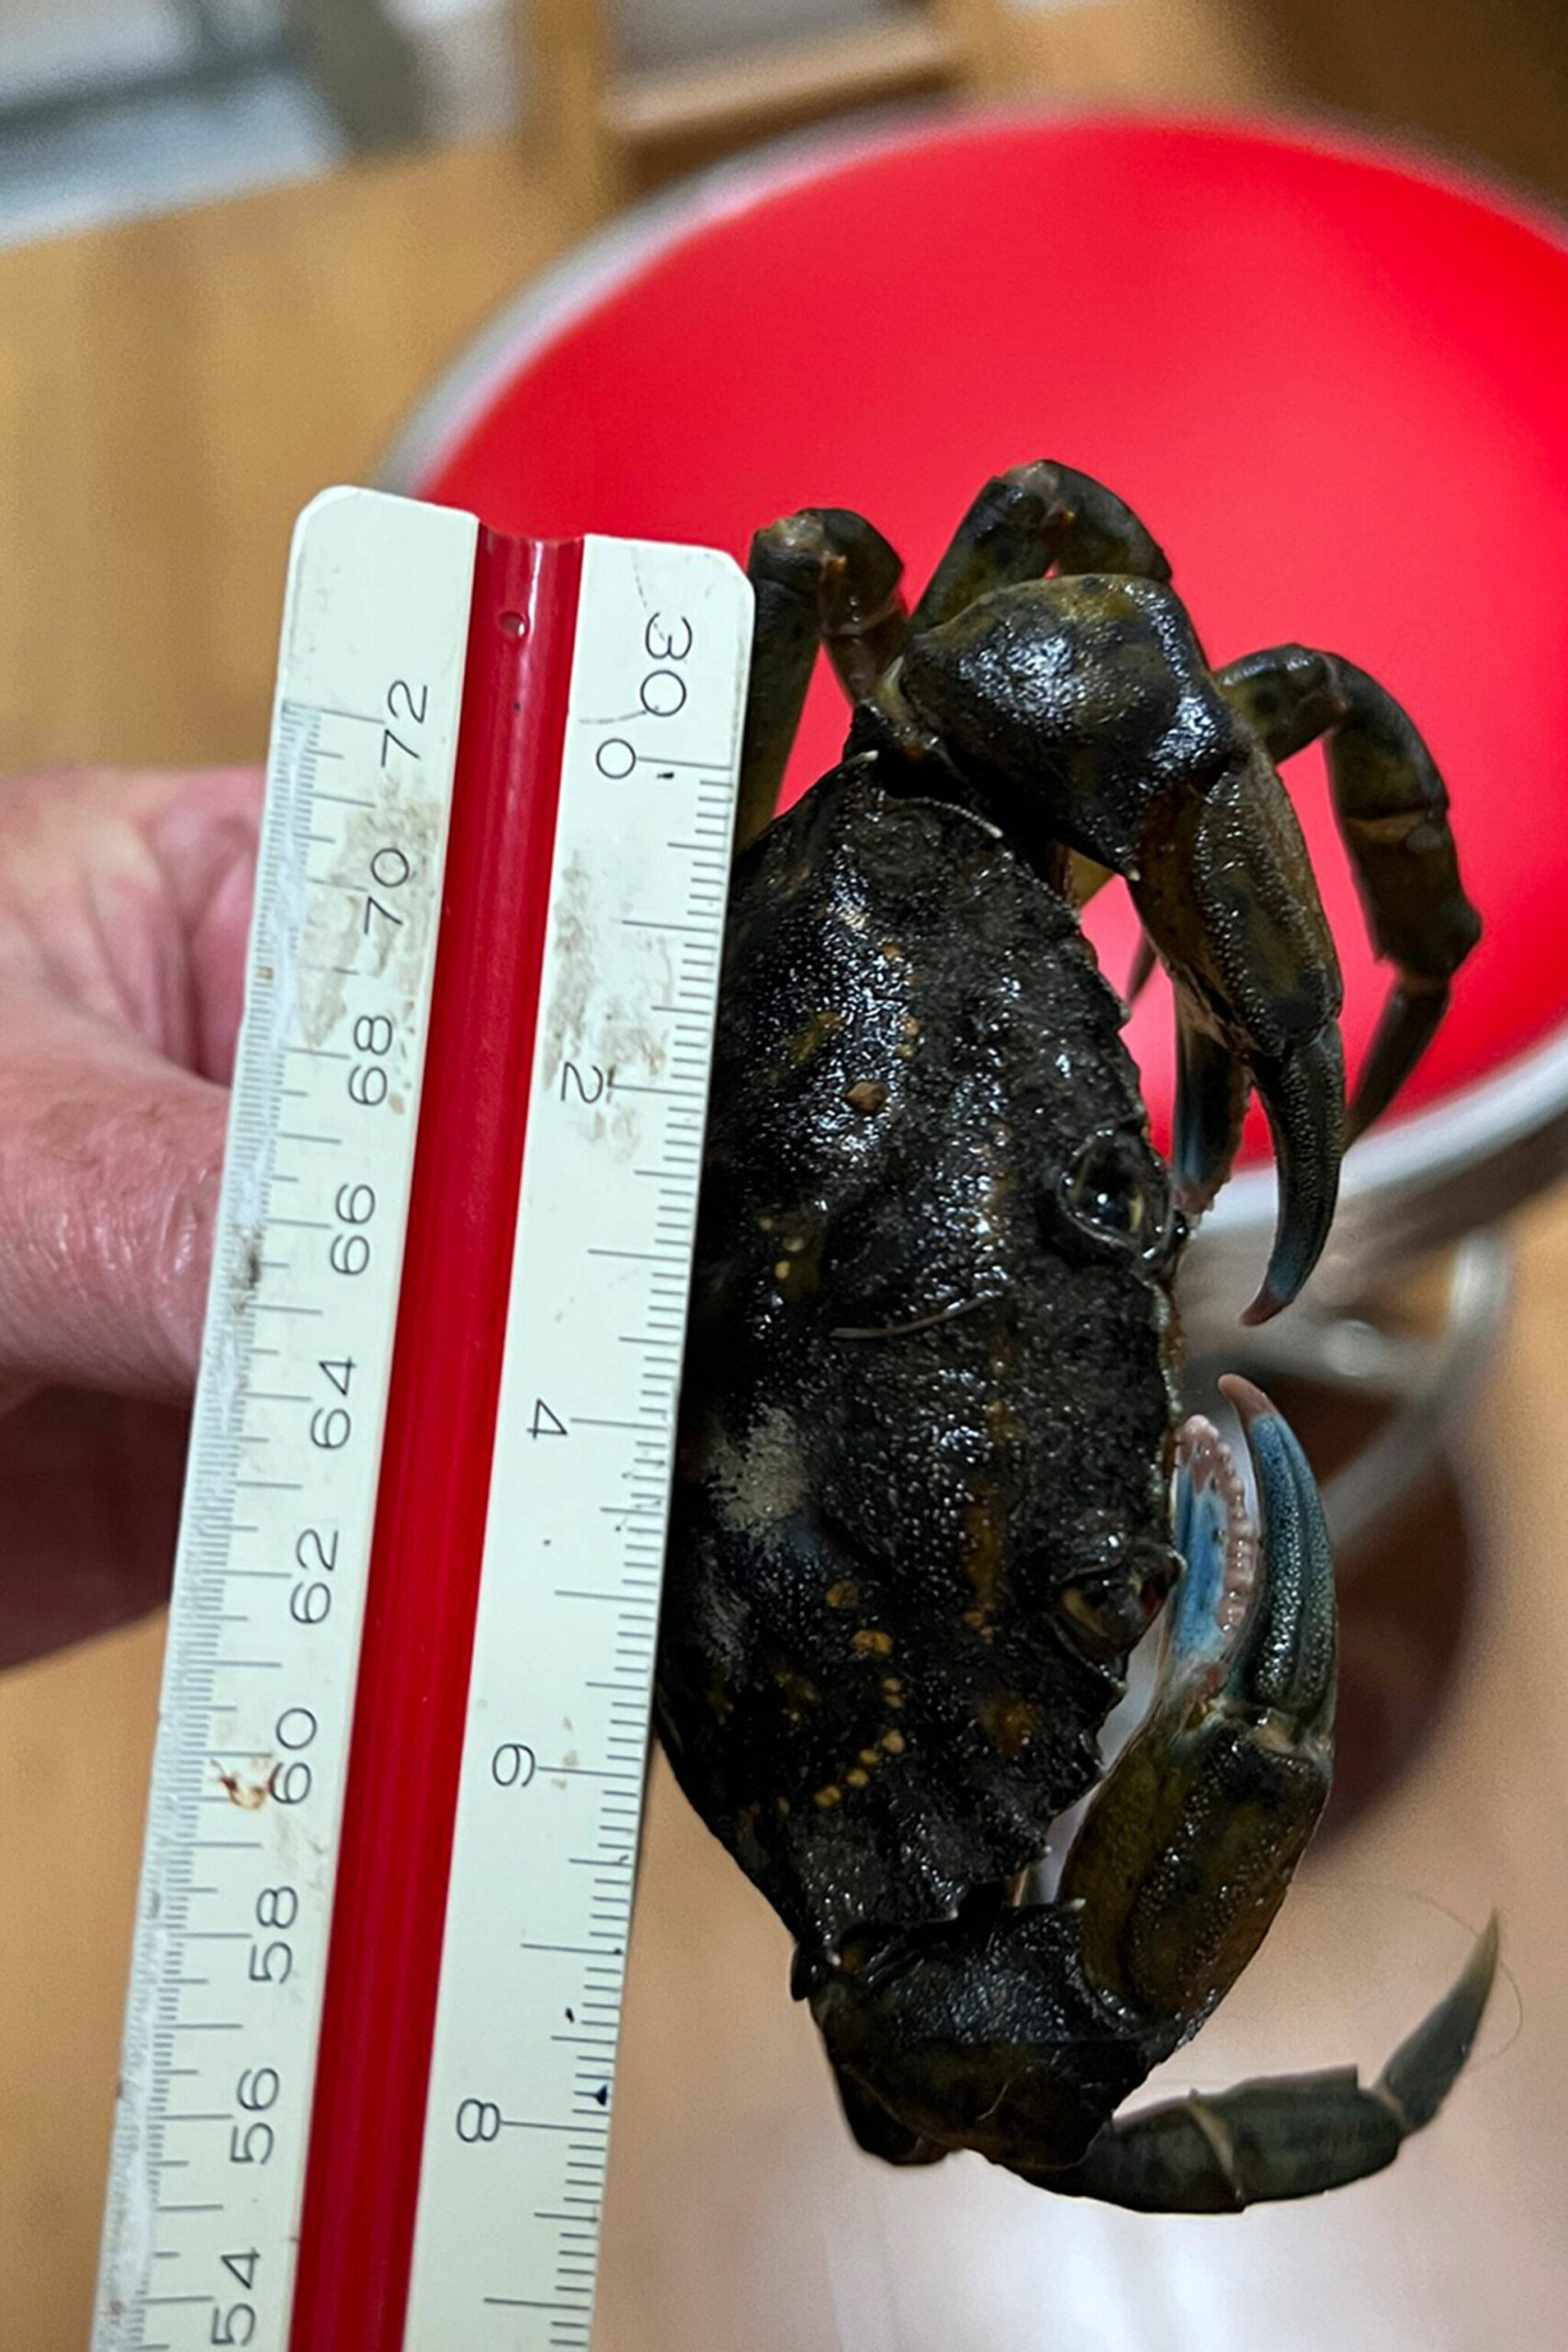 Photo by Coastal Watershed Institute
Coastal Watershed Institute staff, interns and volunteers spotted a European green crab on Oct. 20, 2023 at the Salt Creek Recreation Area, which led to four of the invasive species to be caught Oct. 24-26.